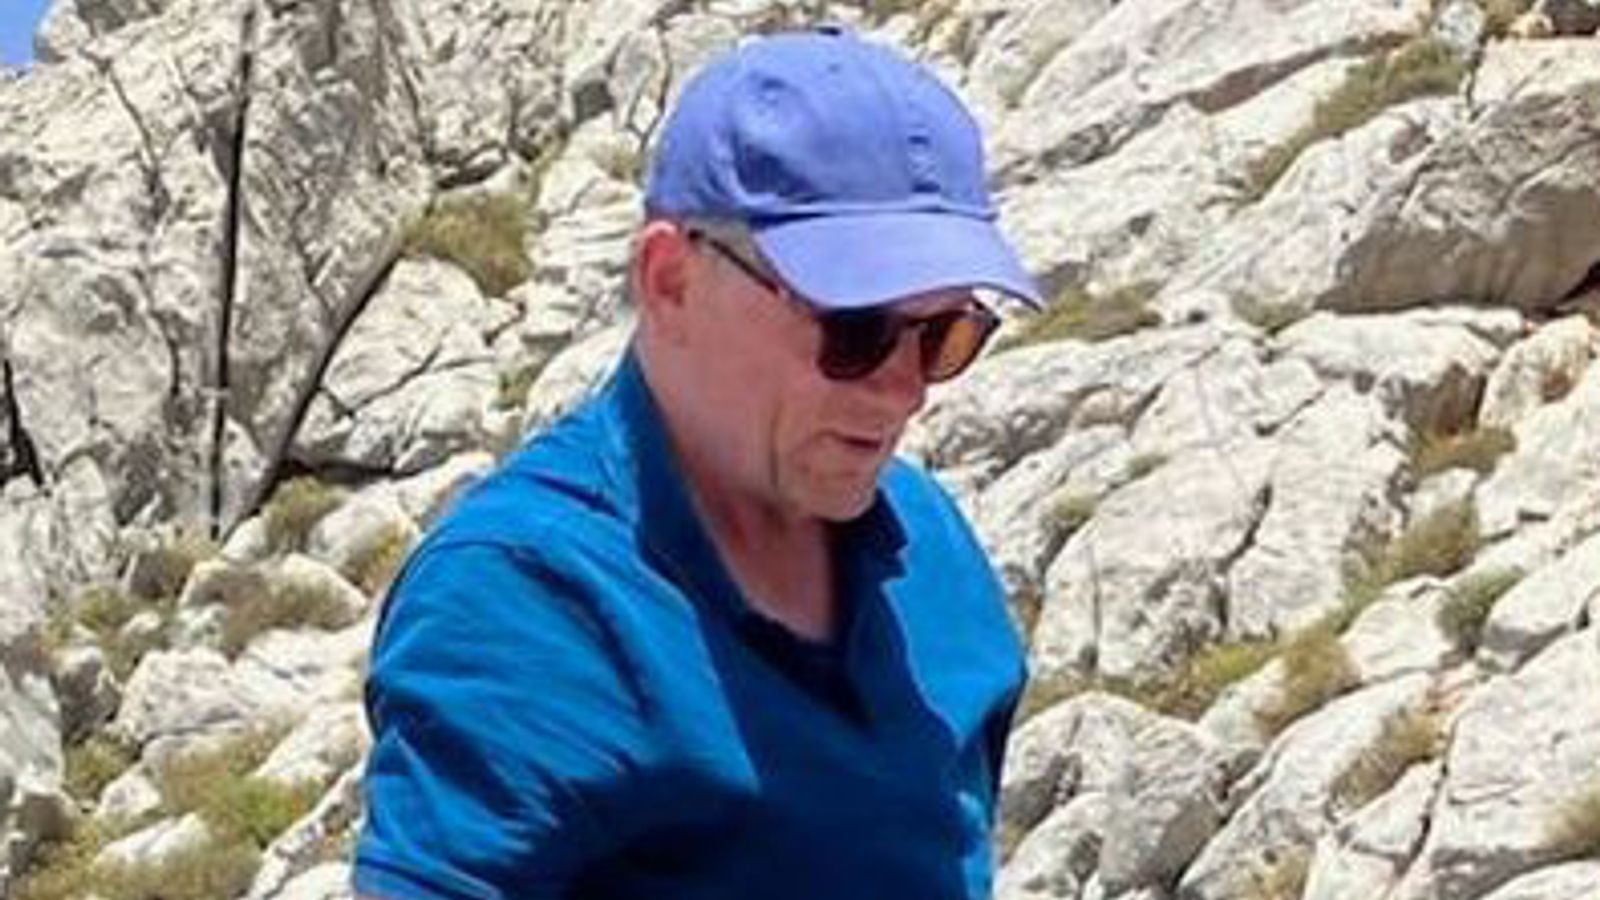 Michael Mosley: TV doctor's body was found just metres from safety